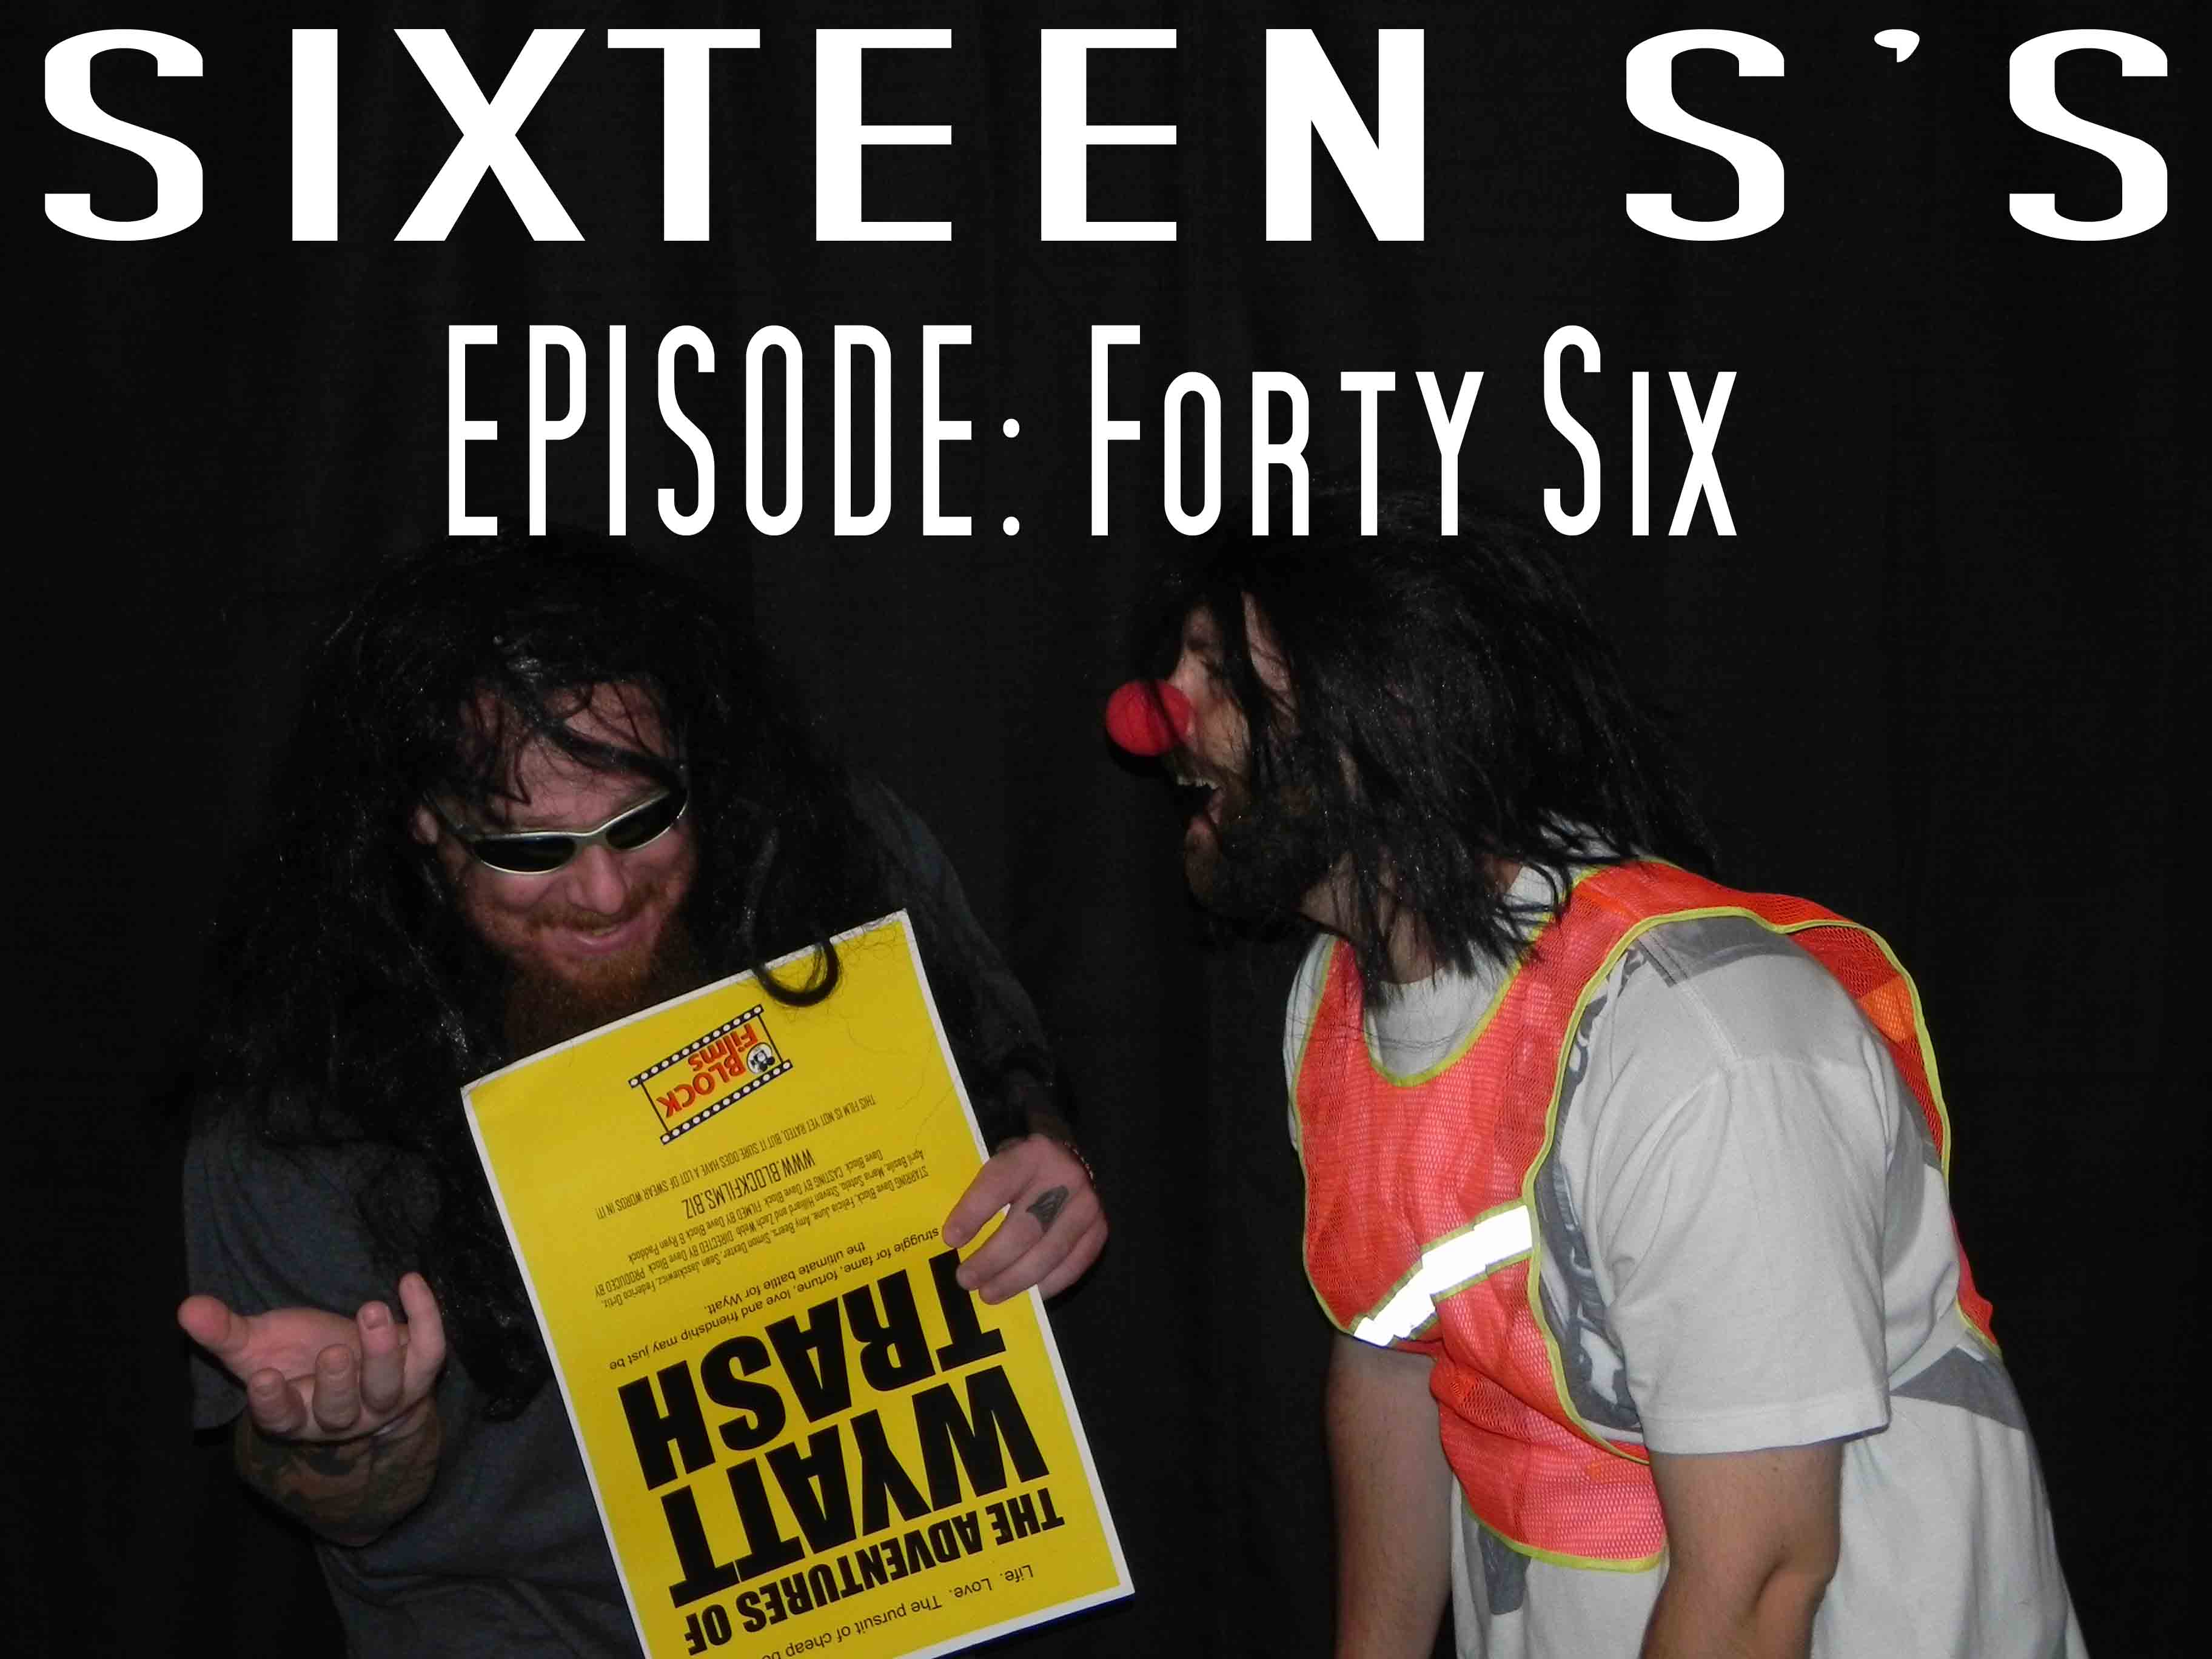 Sixteen S’s (Episode Forty Six)